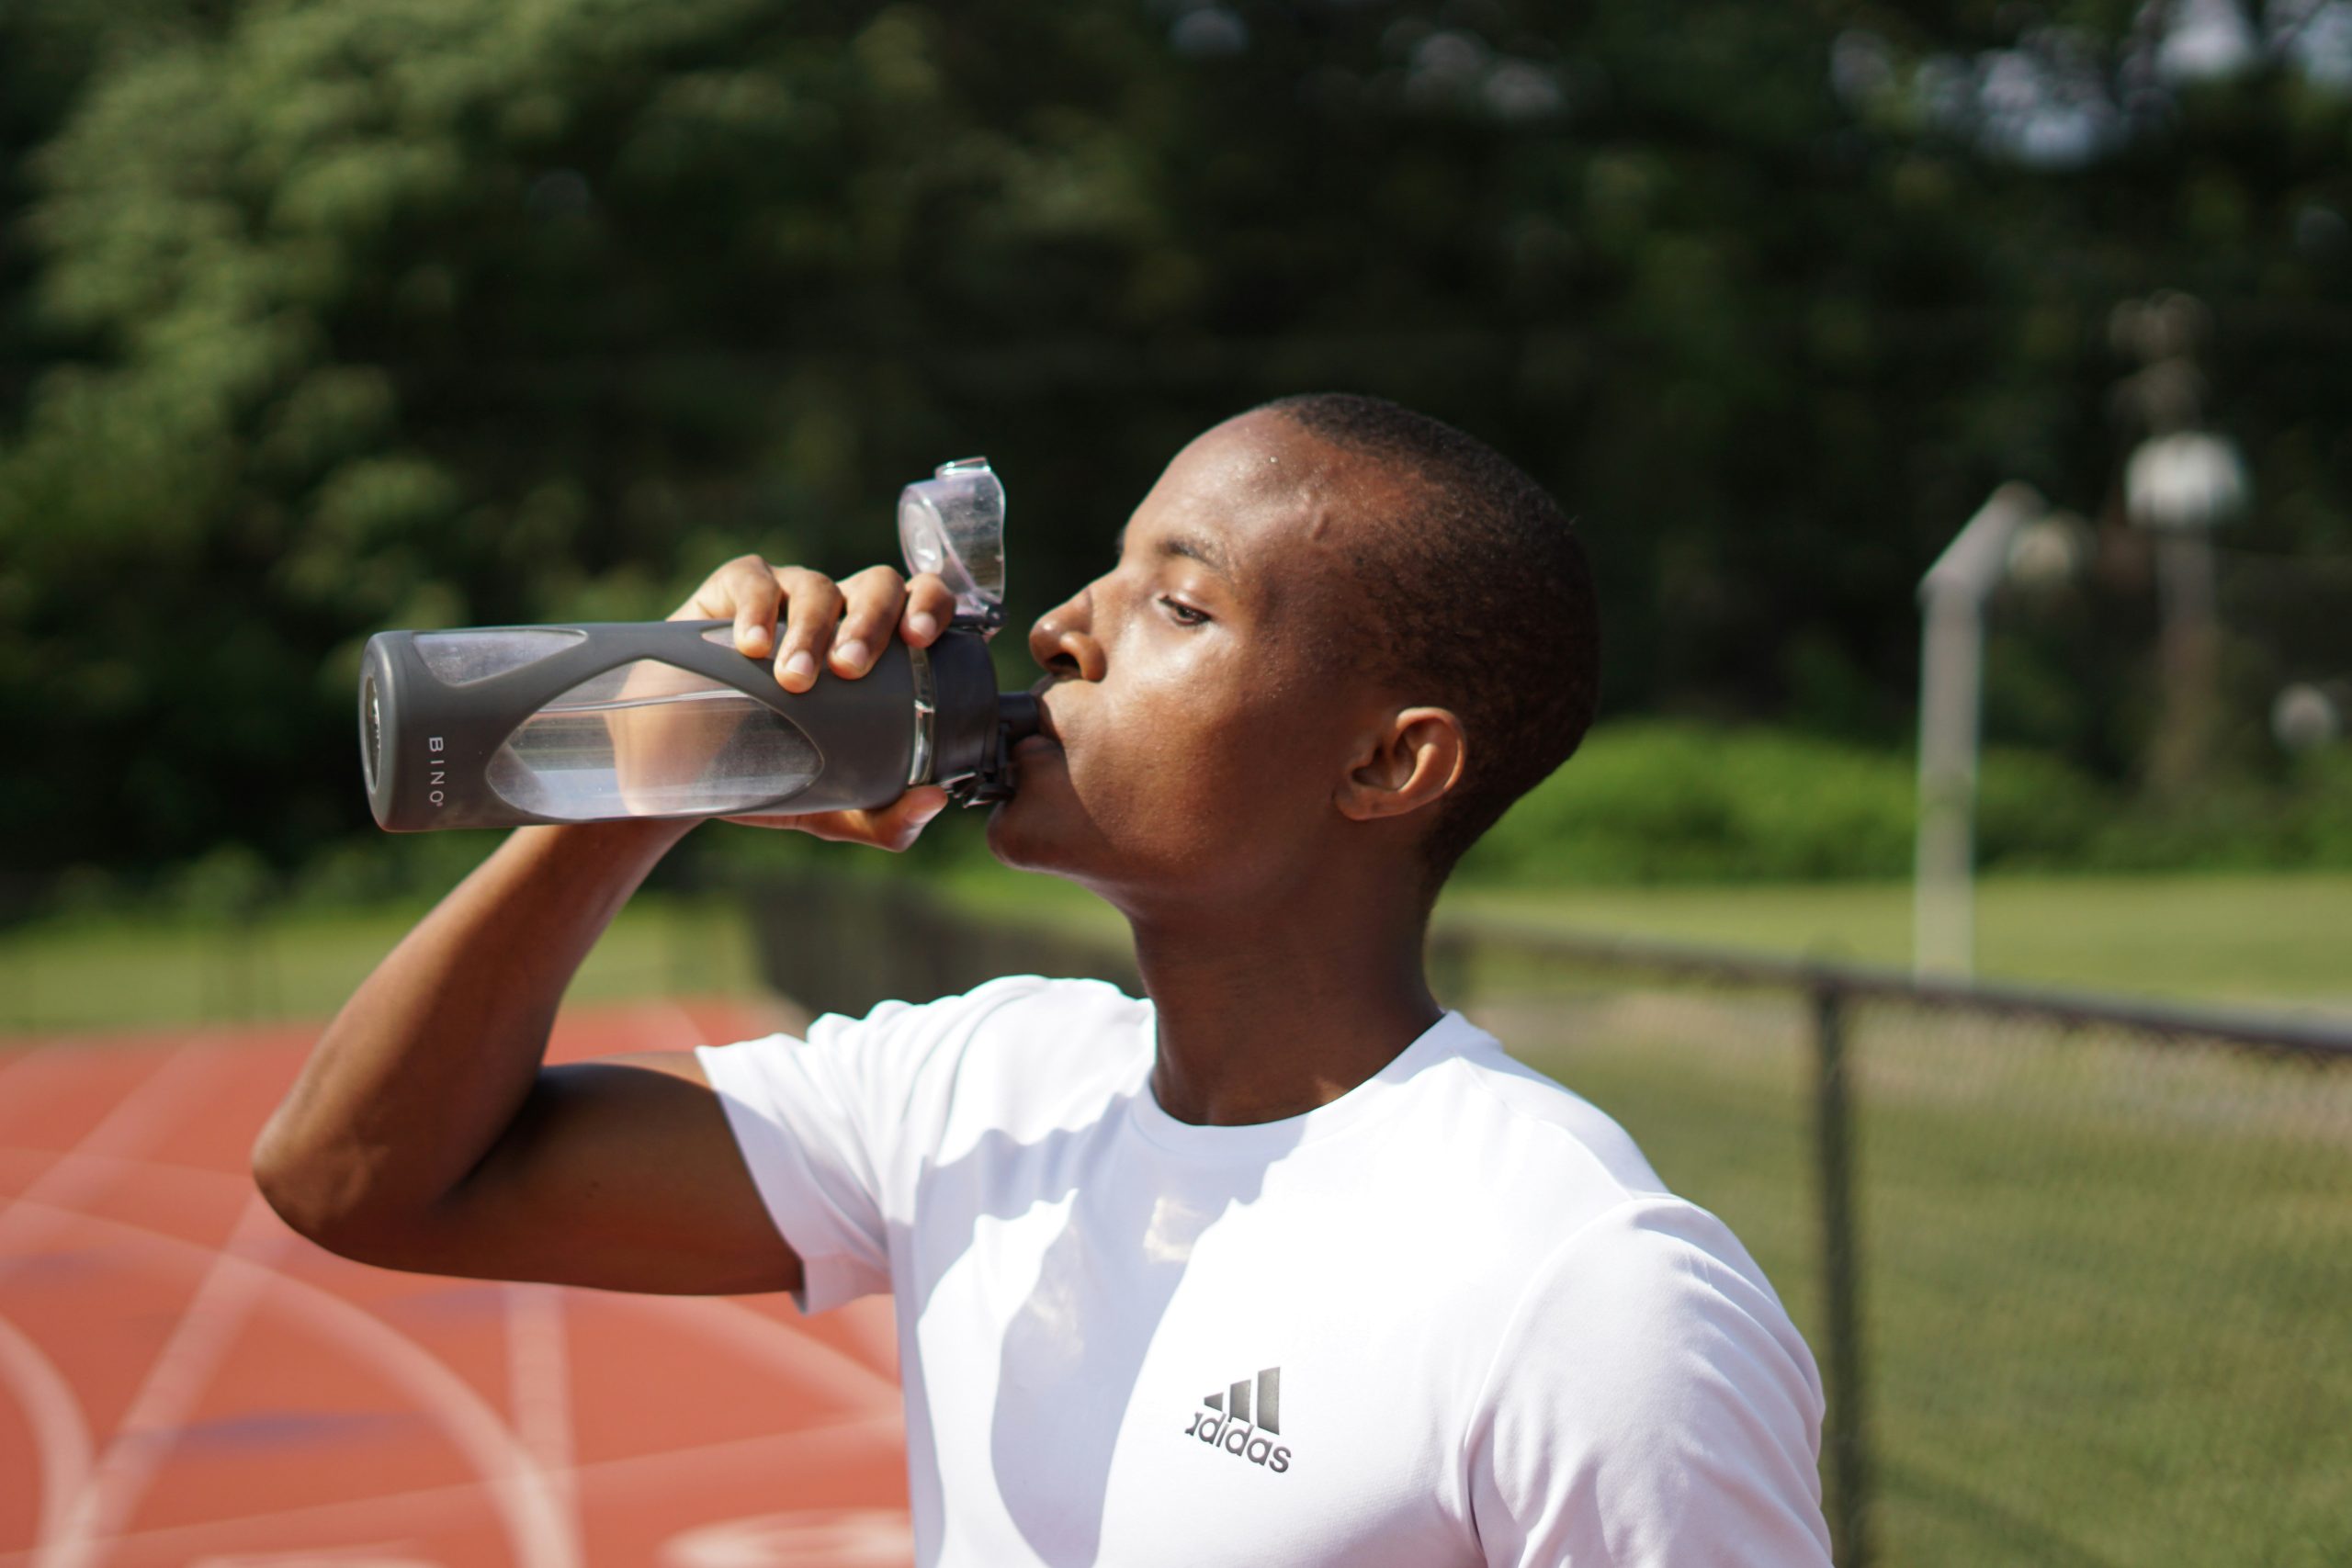 too much water: athlete sipping water